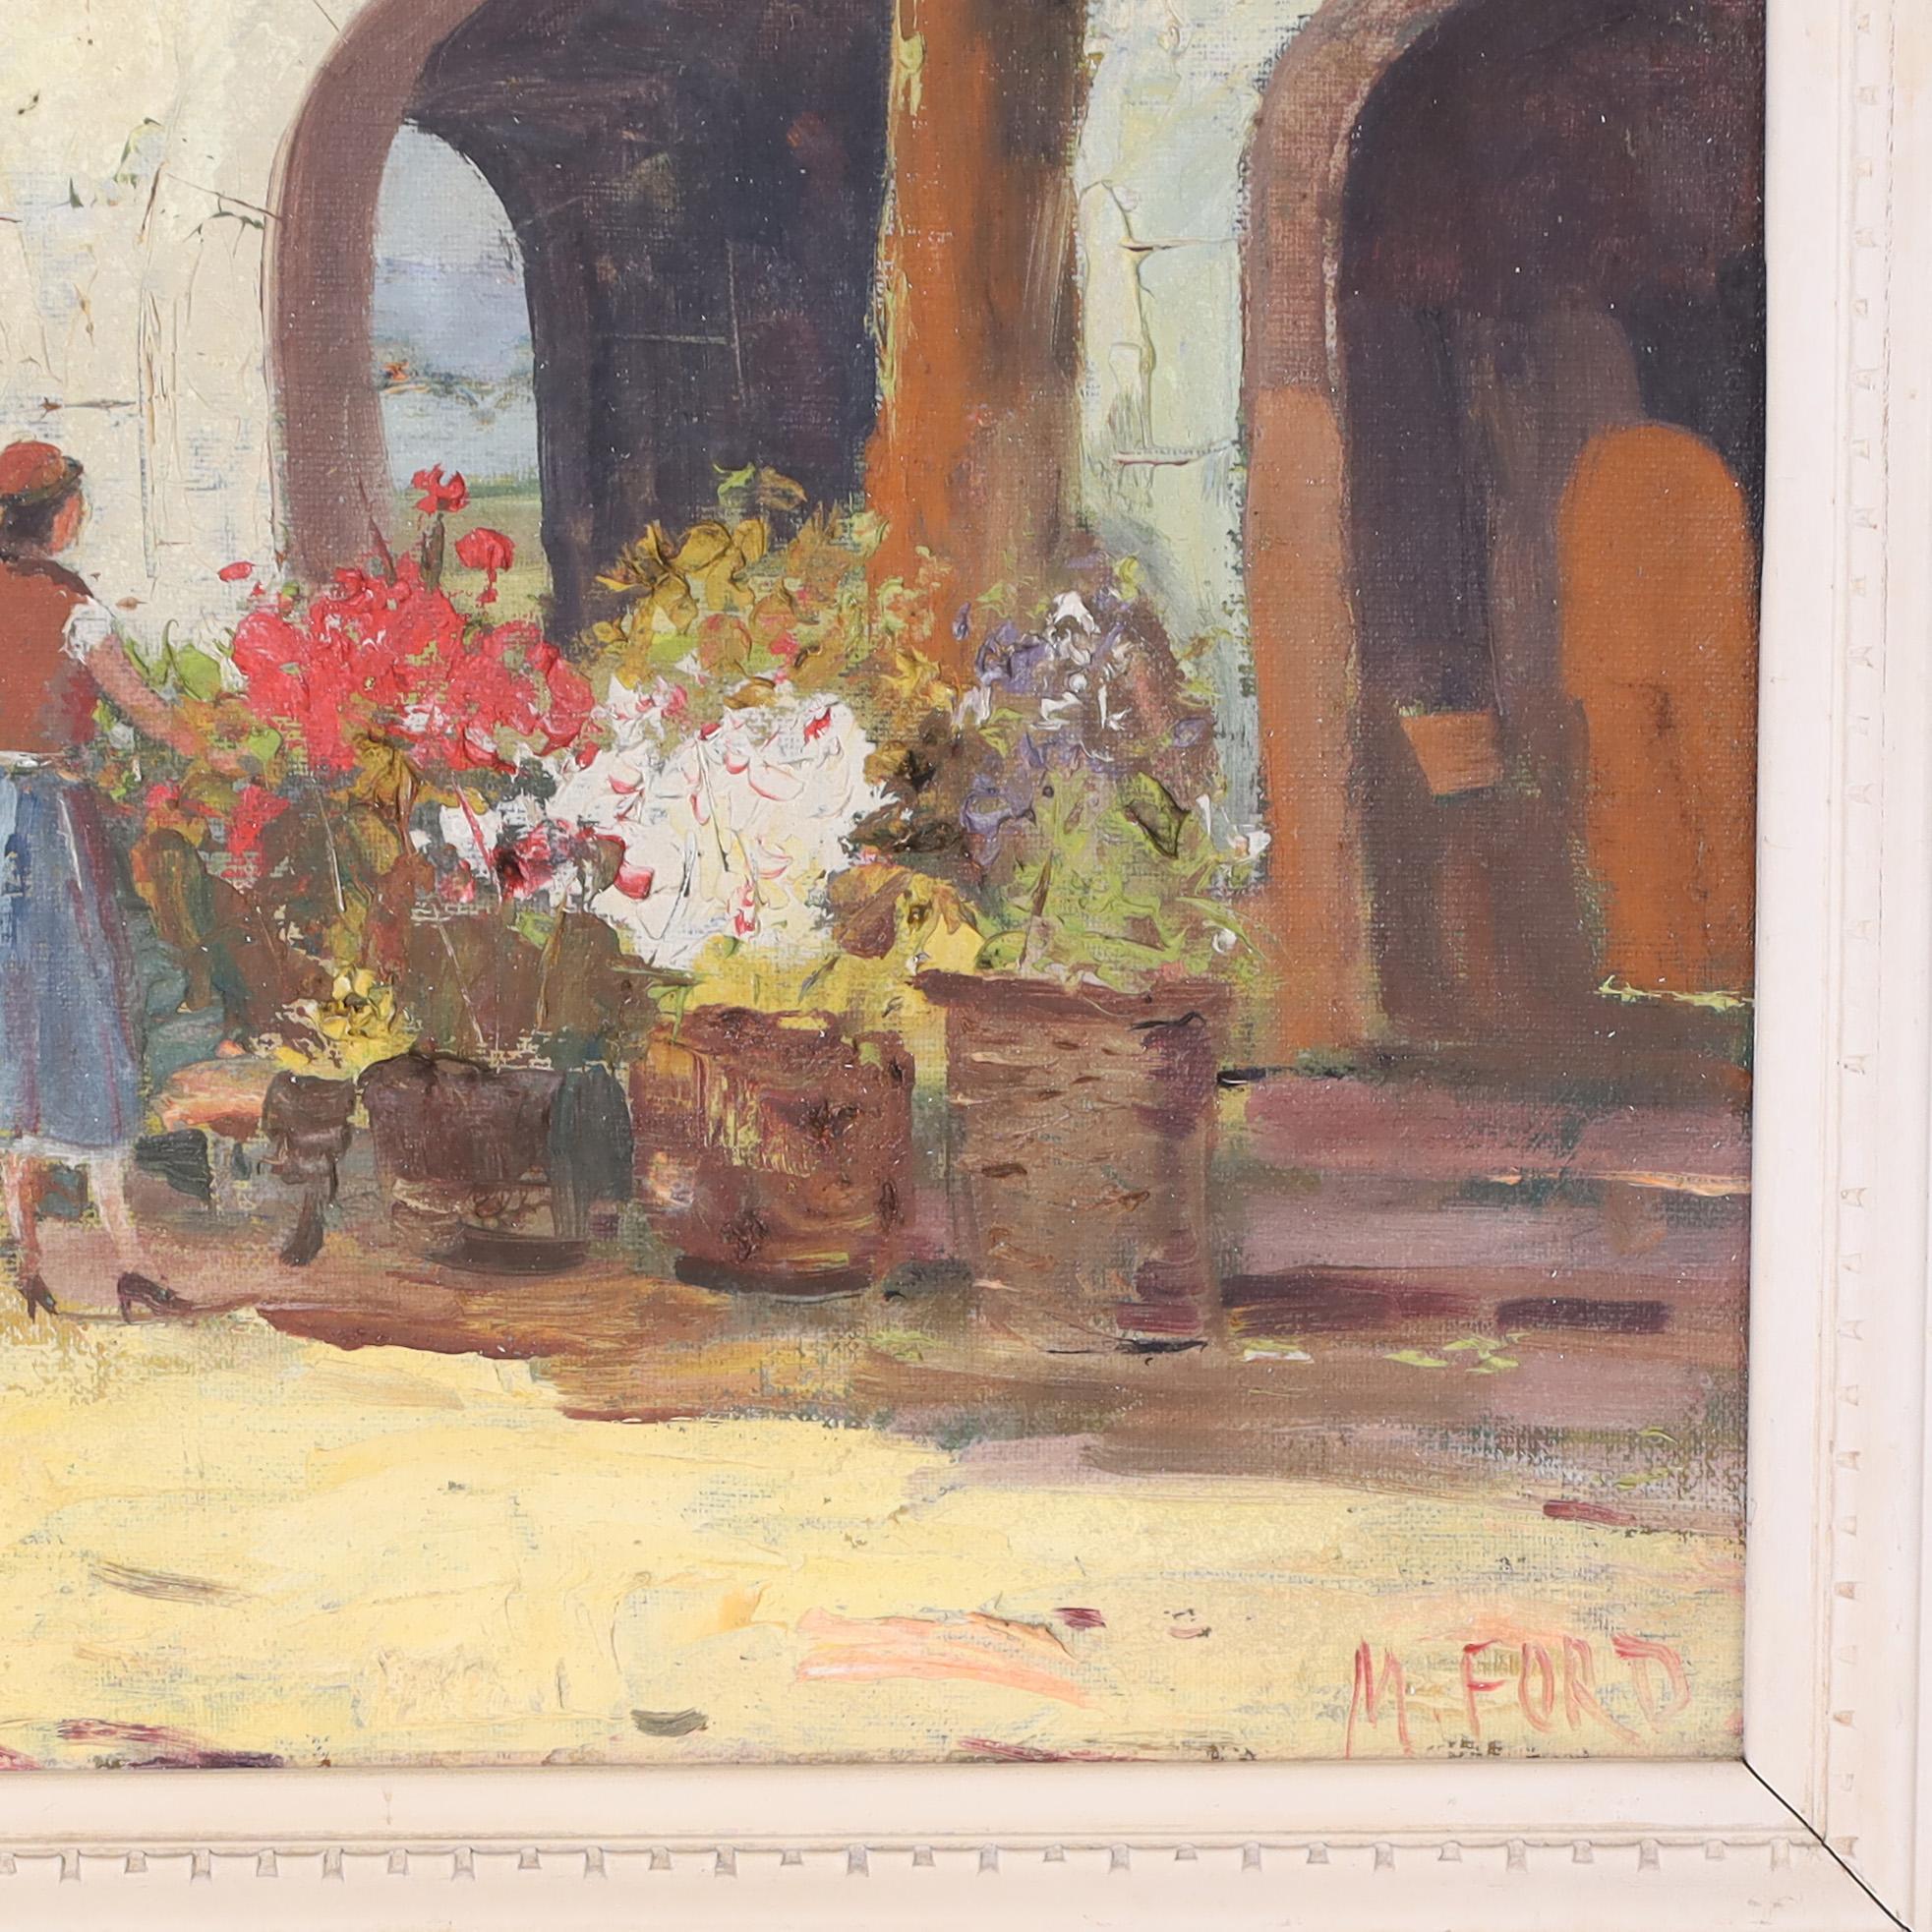 Caribbean Vintage Oil Painting on Canvas of a Flower Market